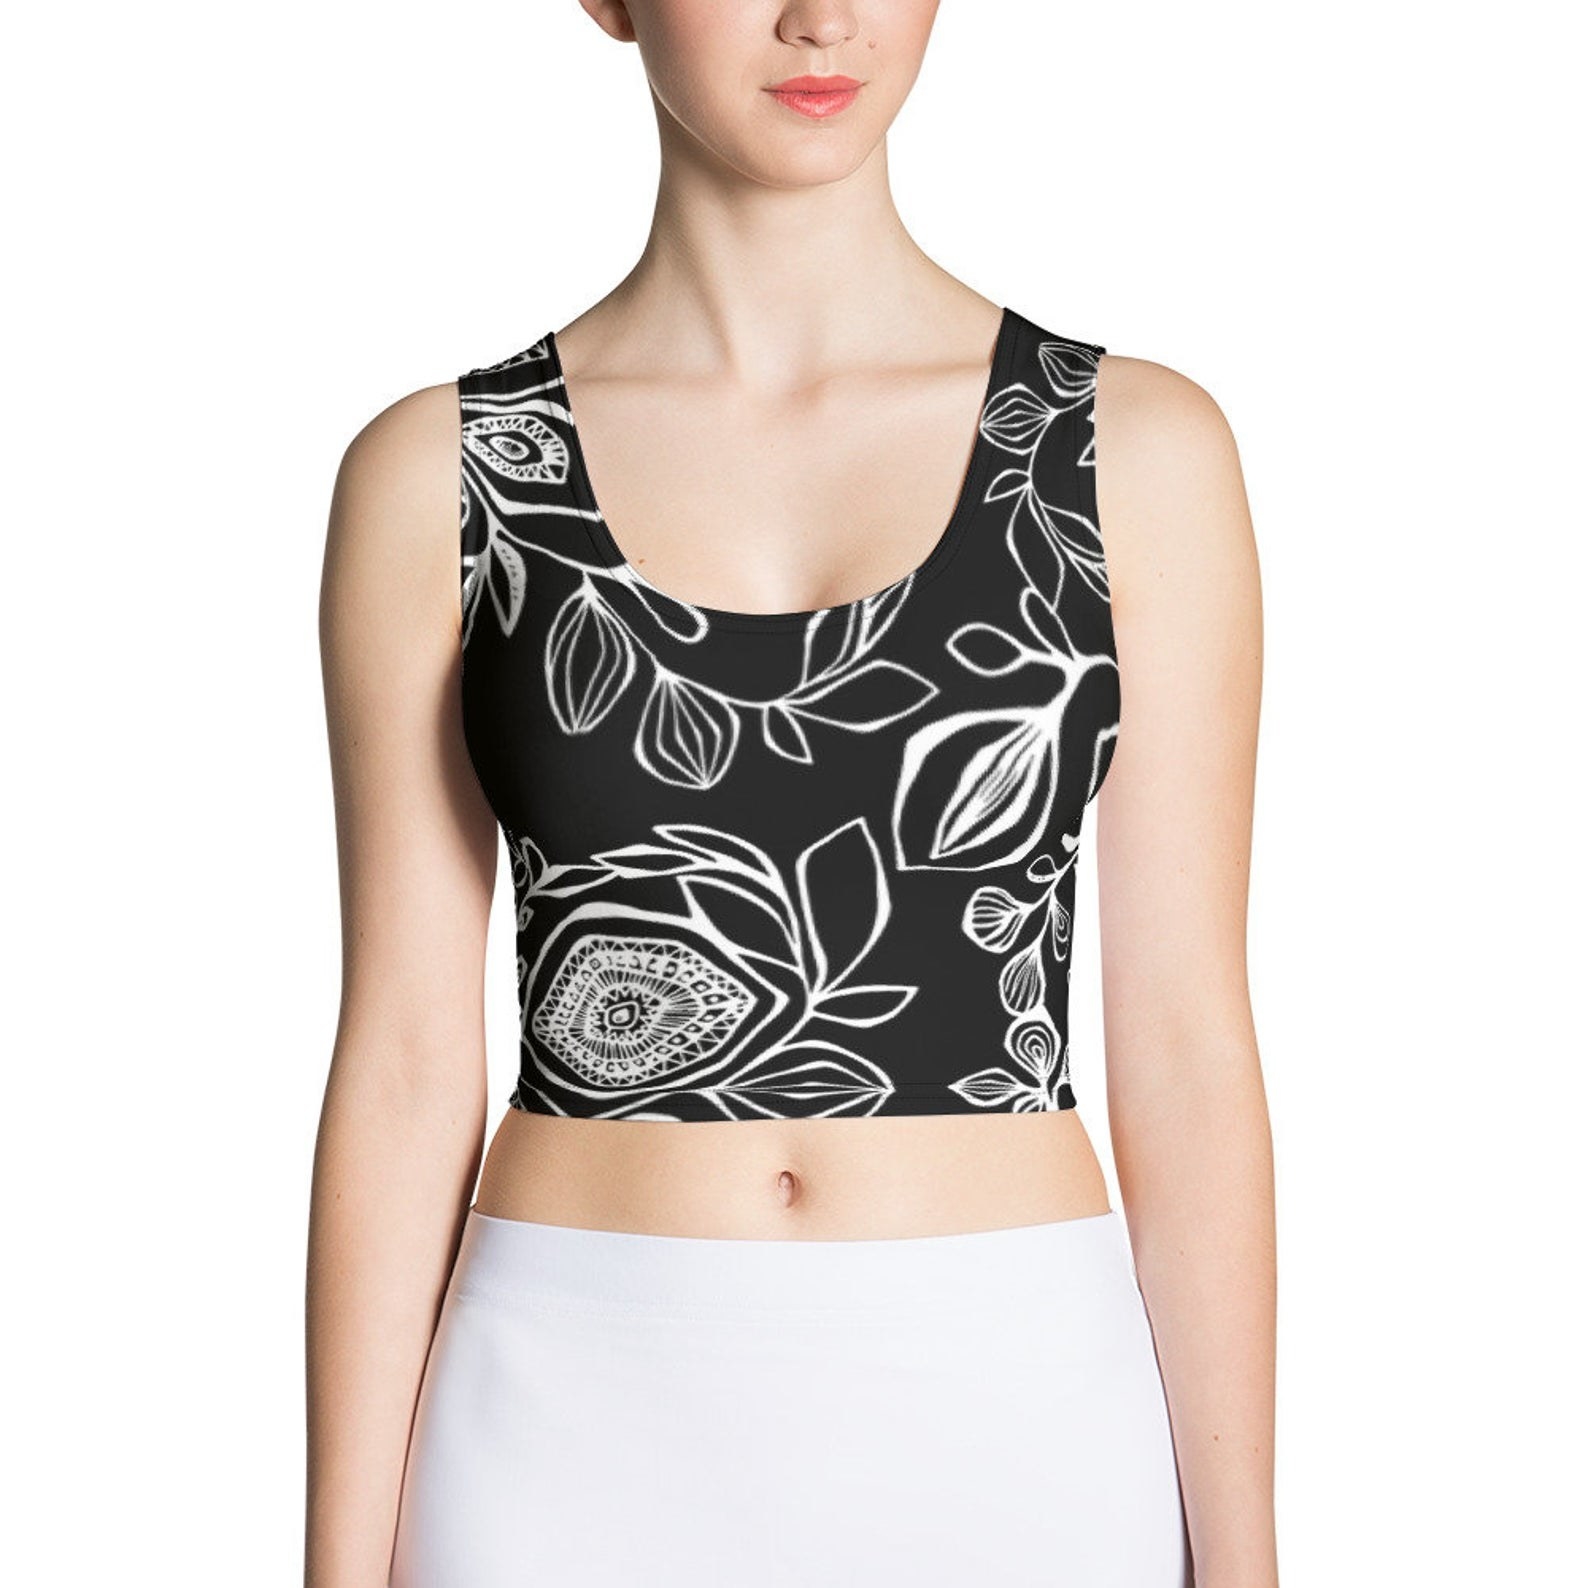 A model in a black crop top with white floral patterns